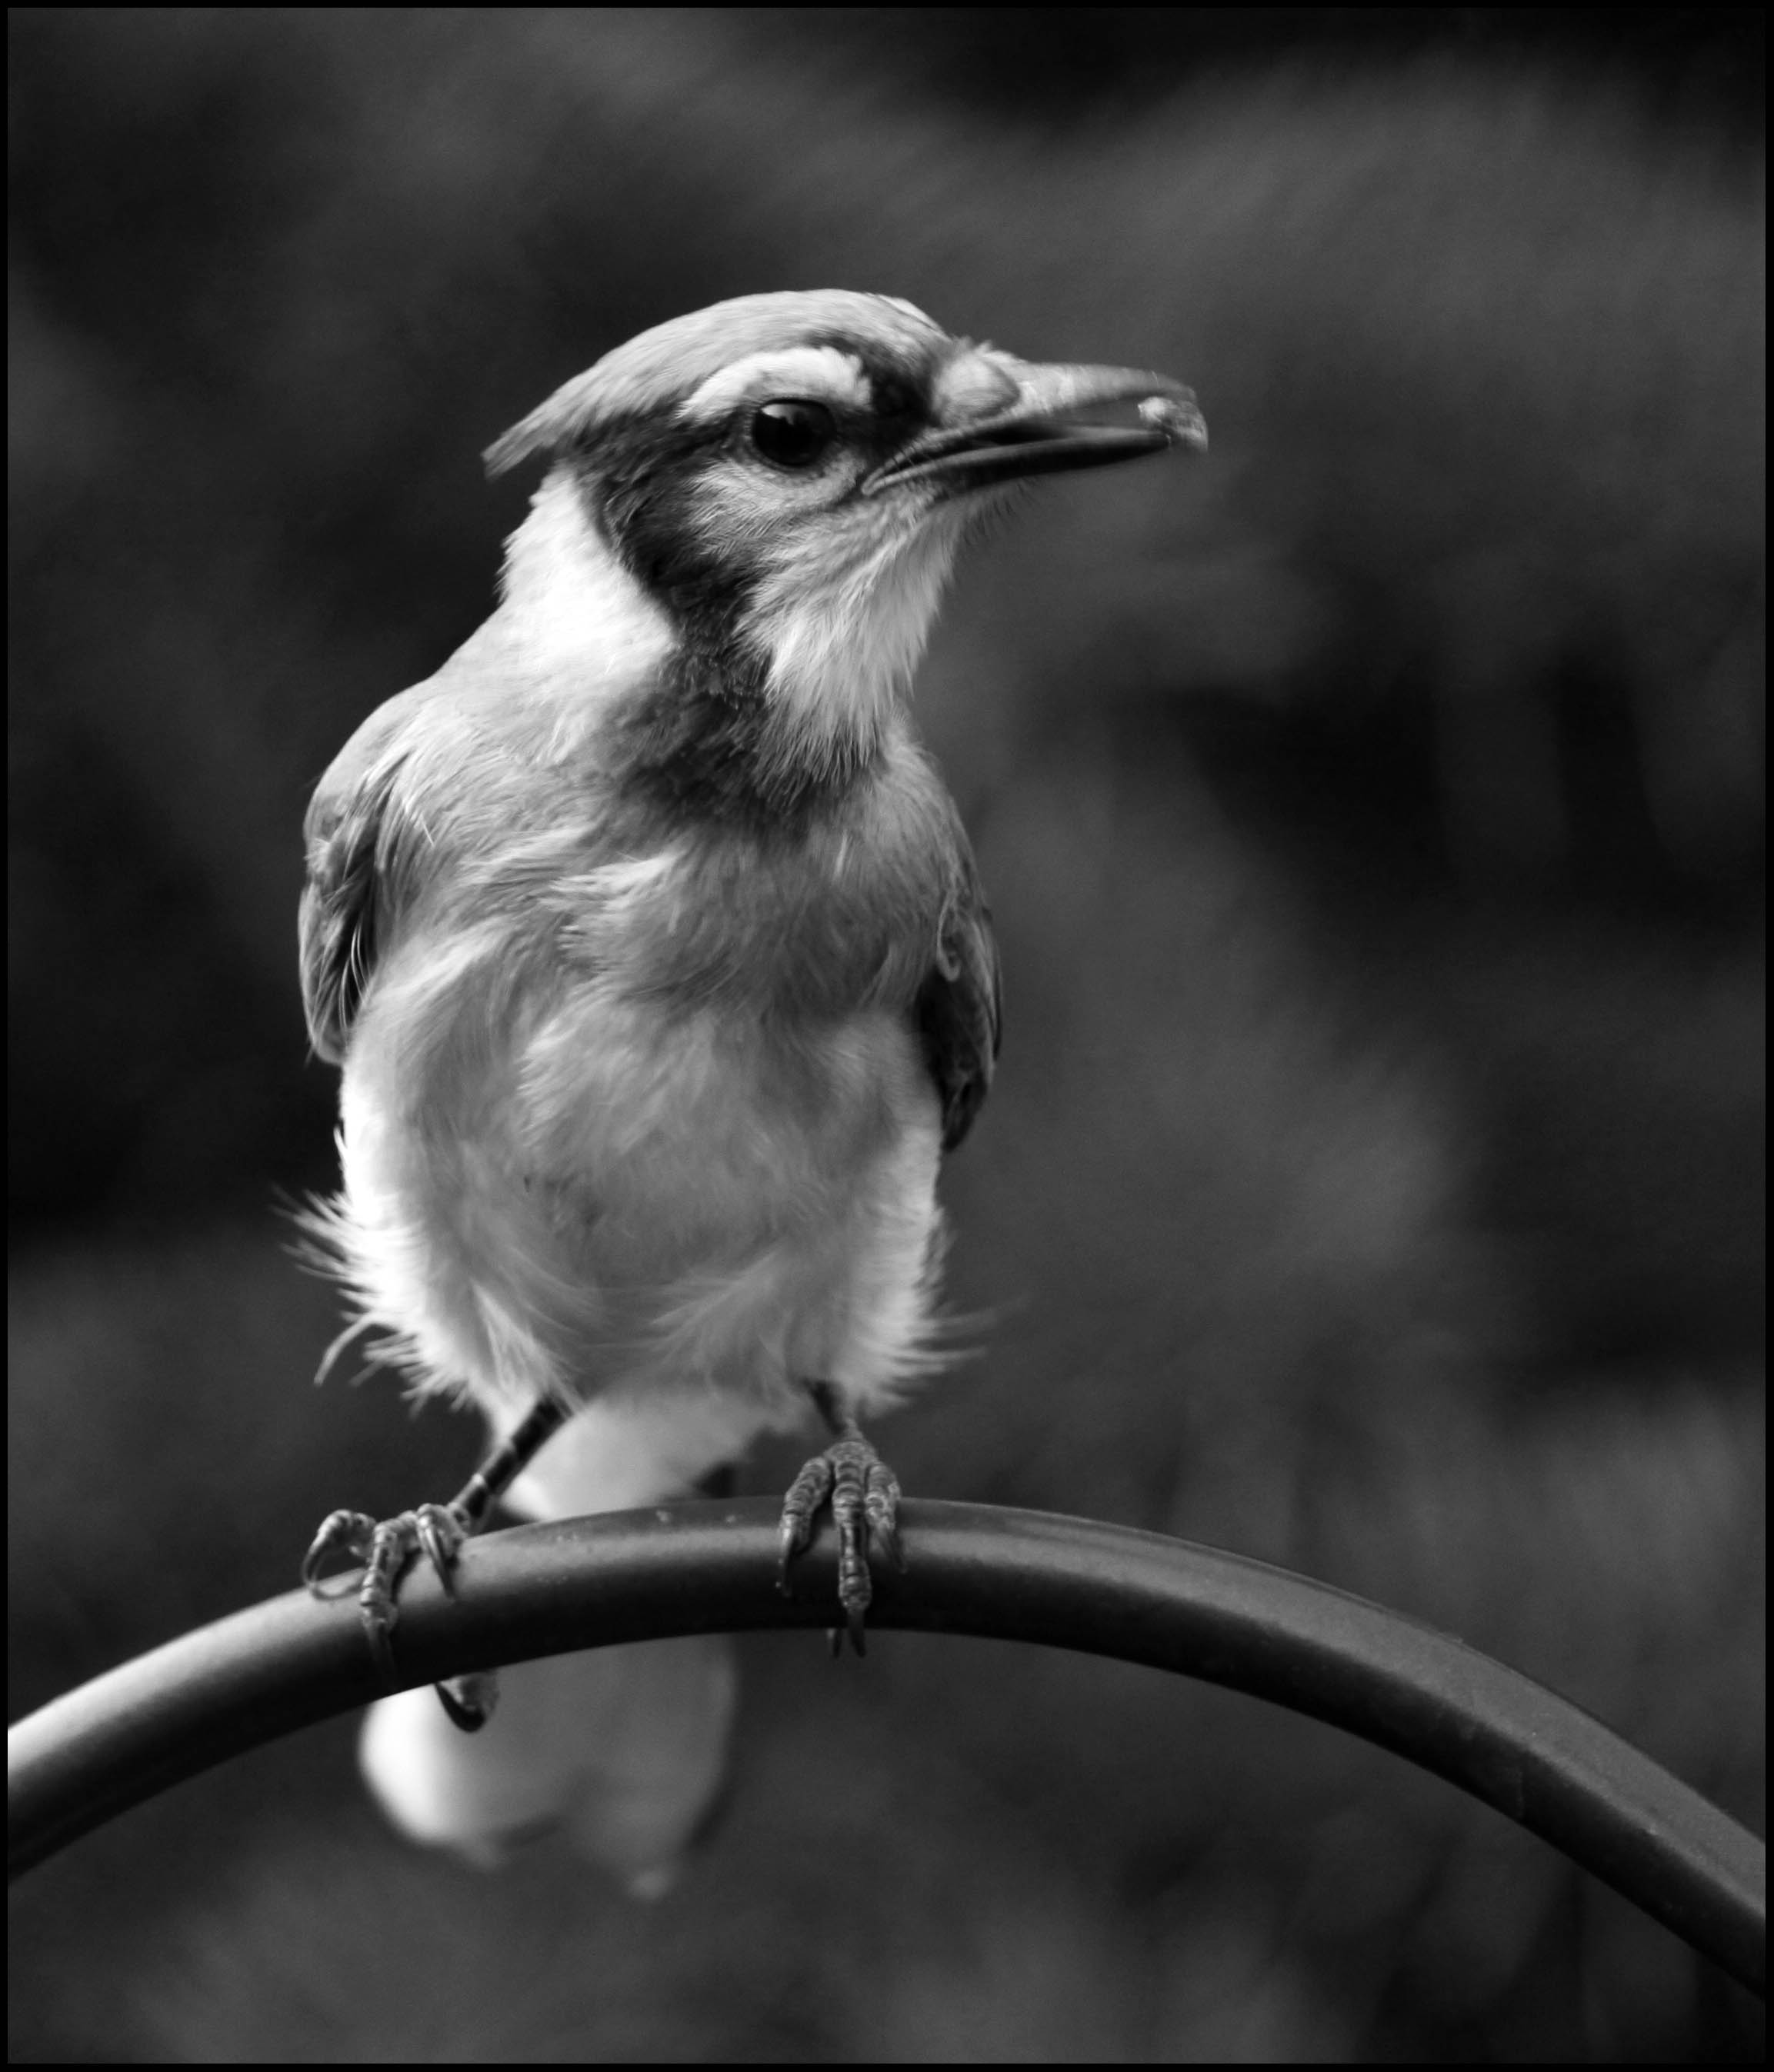 File:A Black and White Blue Jay (4818028350).jpg - Wikimedia Commons